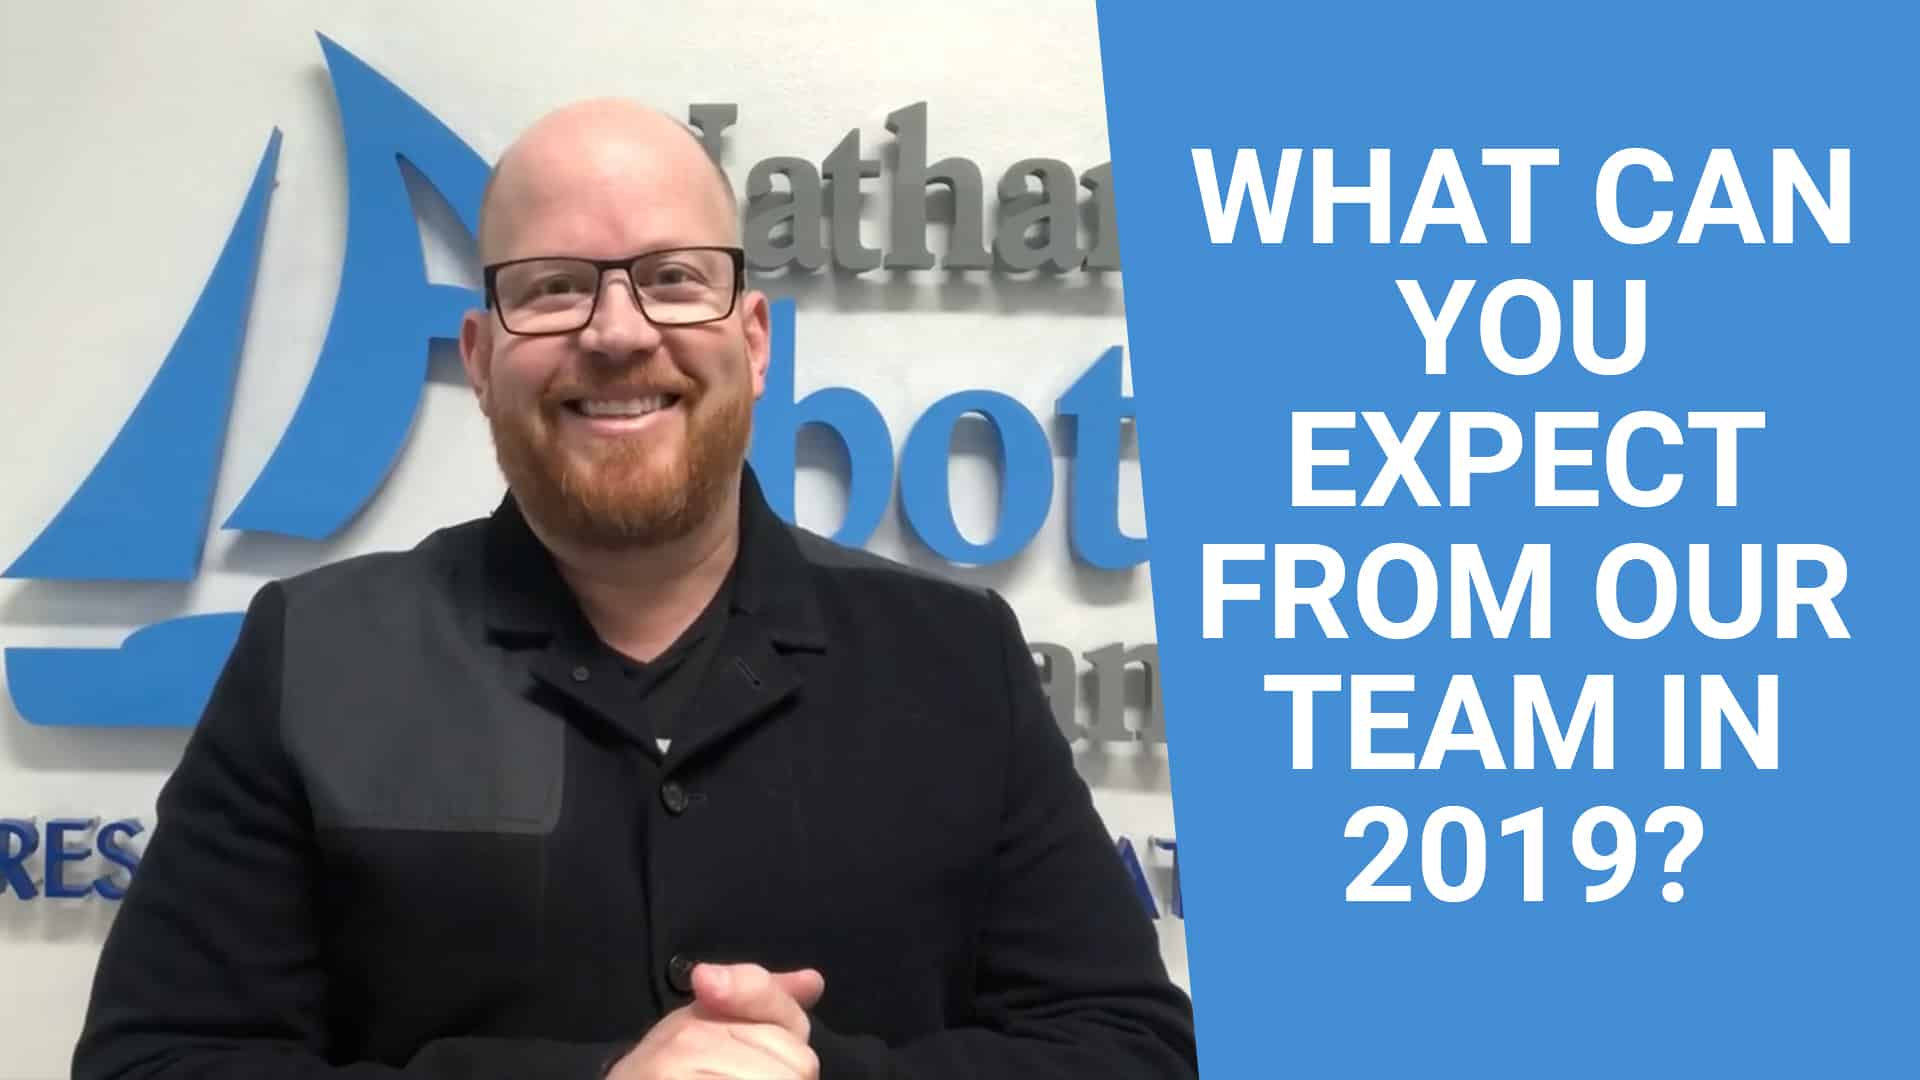 Nathan Abbott Team: What Can You Expect From Our Team in 2019?